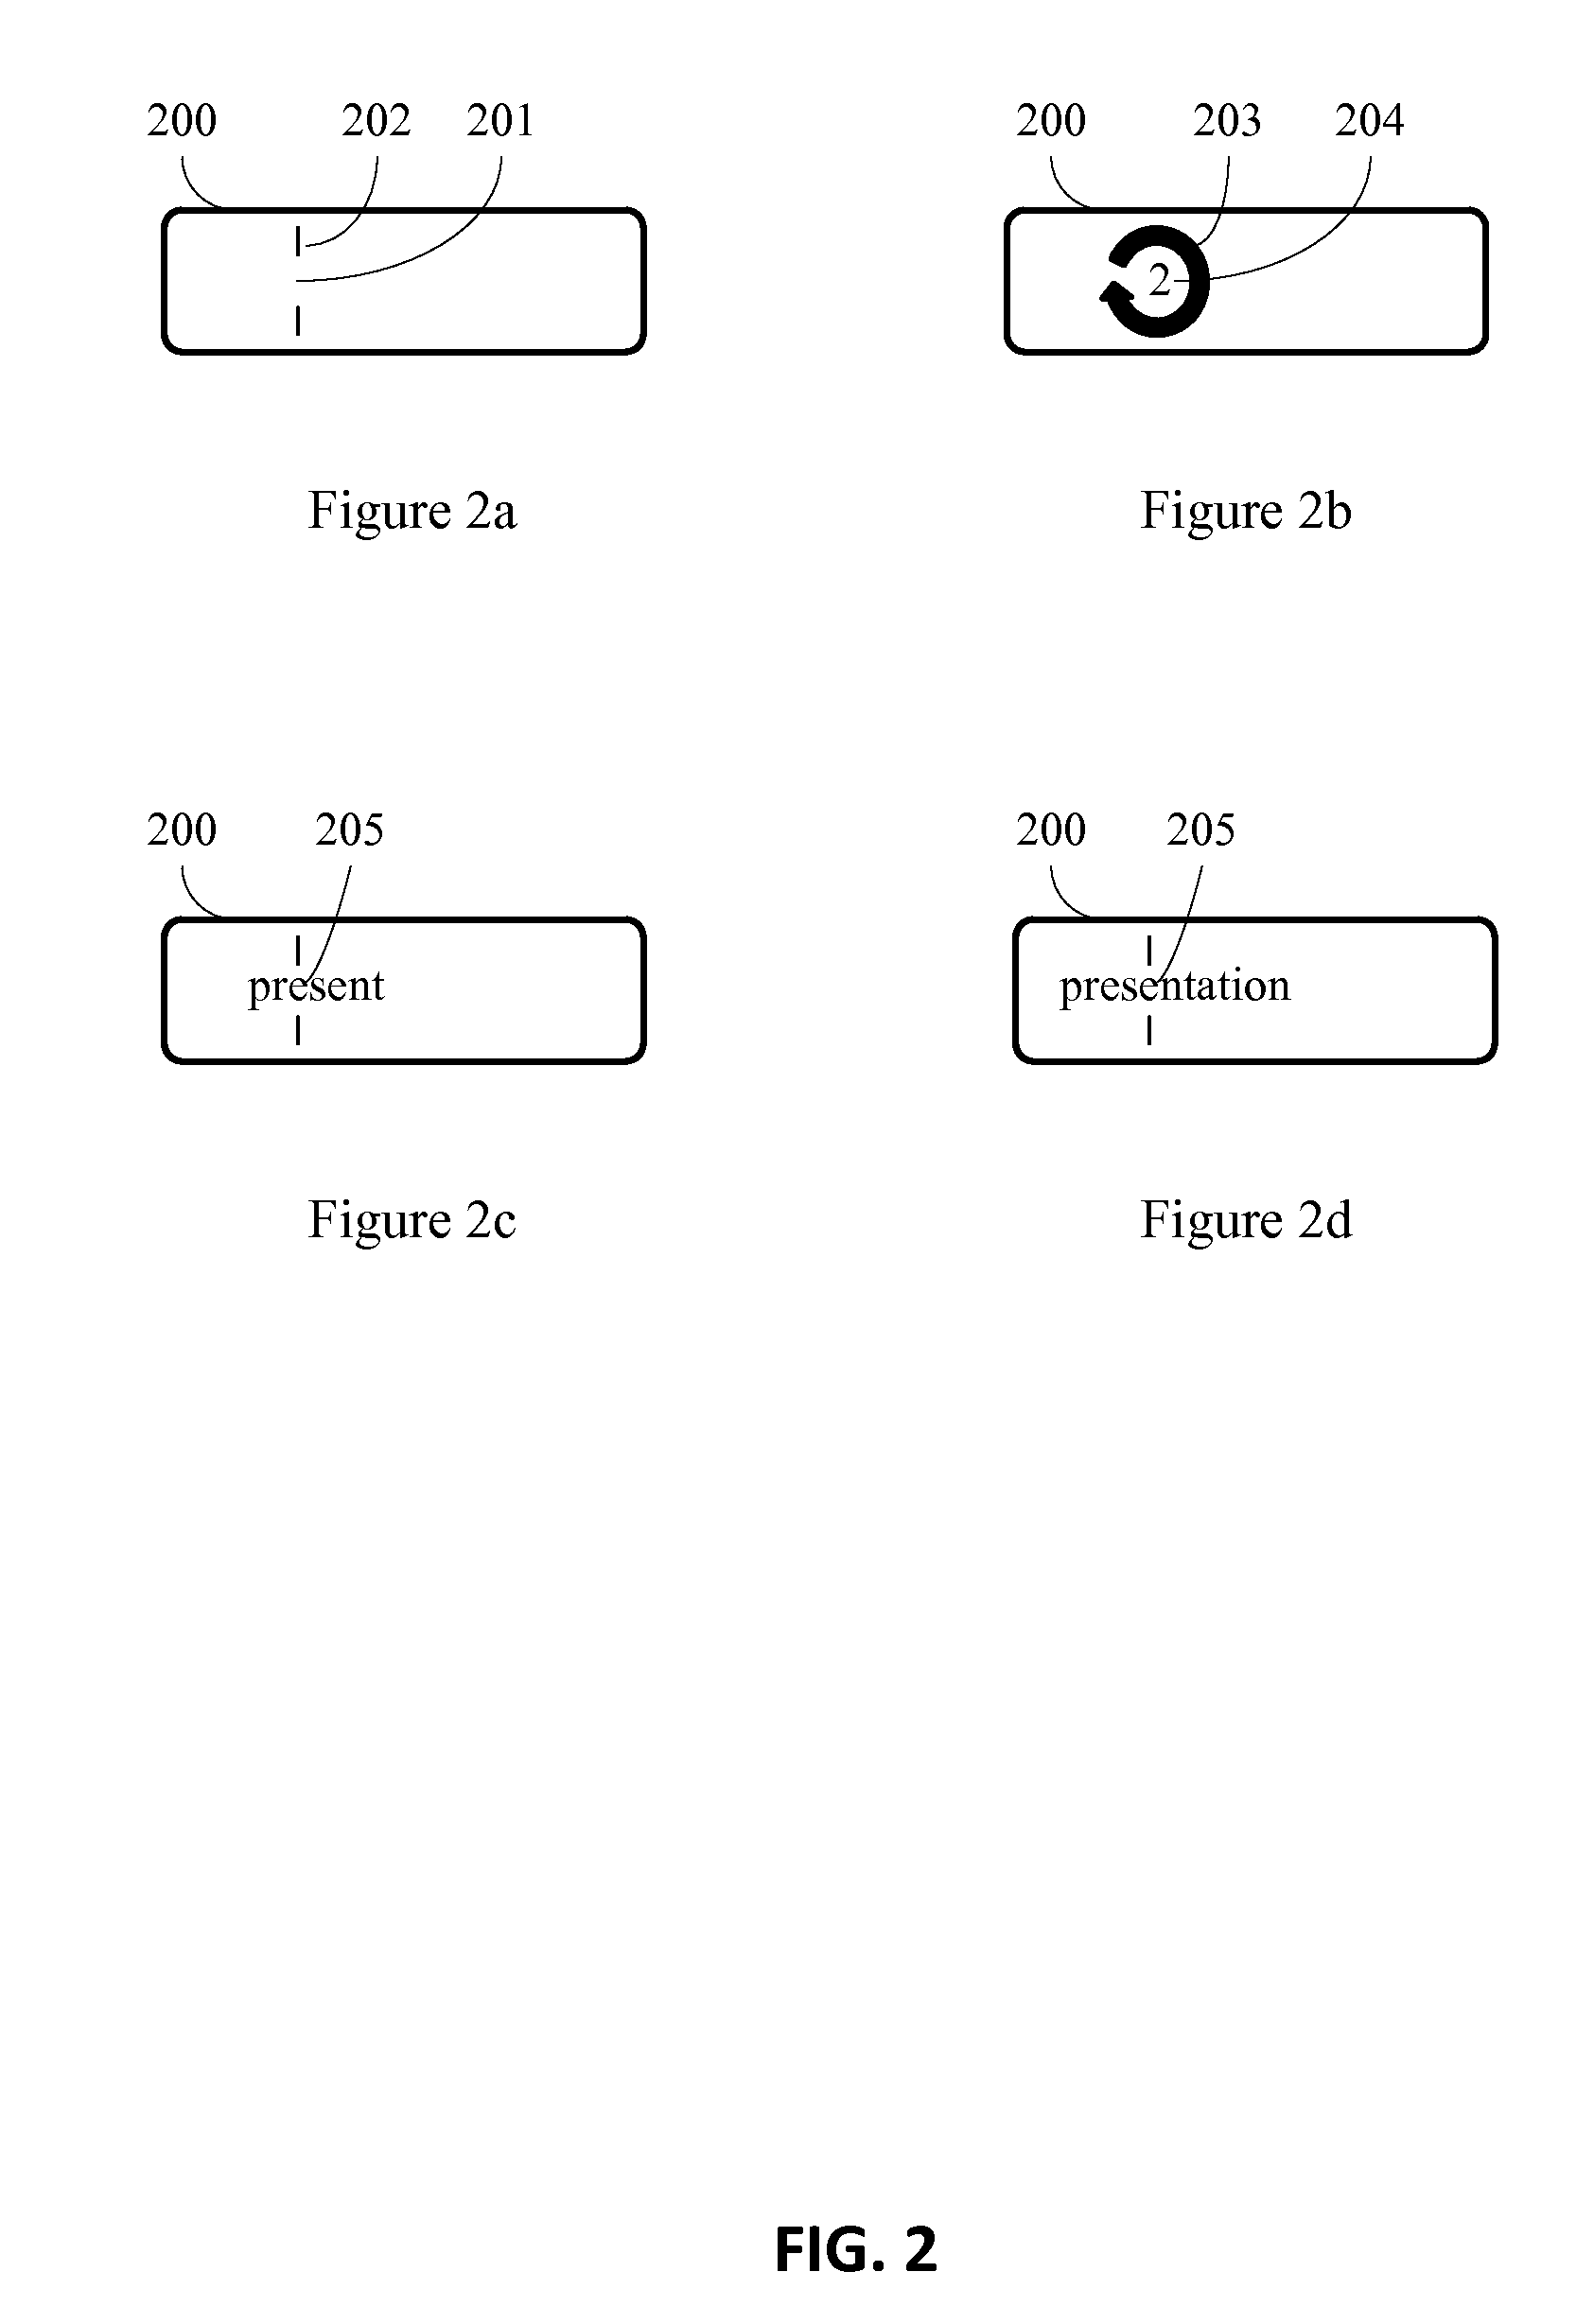 Serial text display for optimal recognition apparatus and method